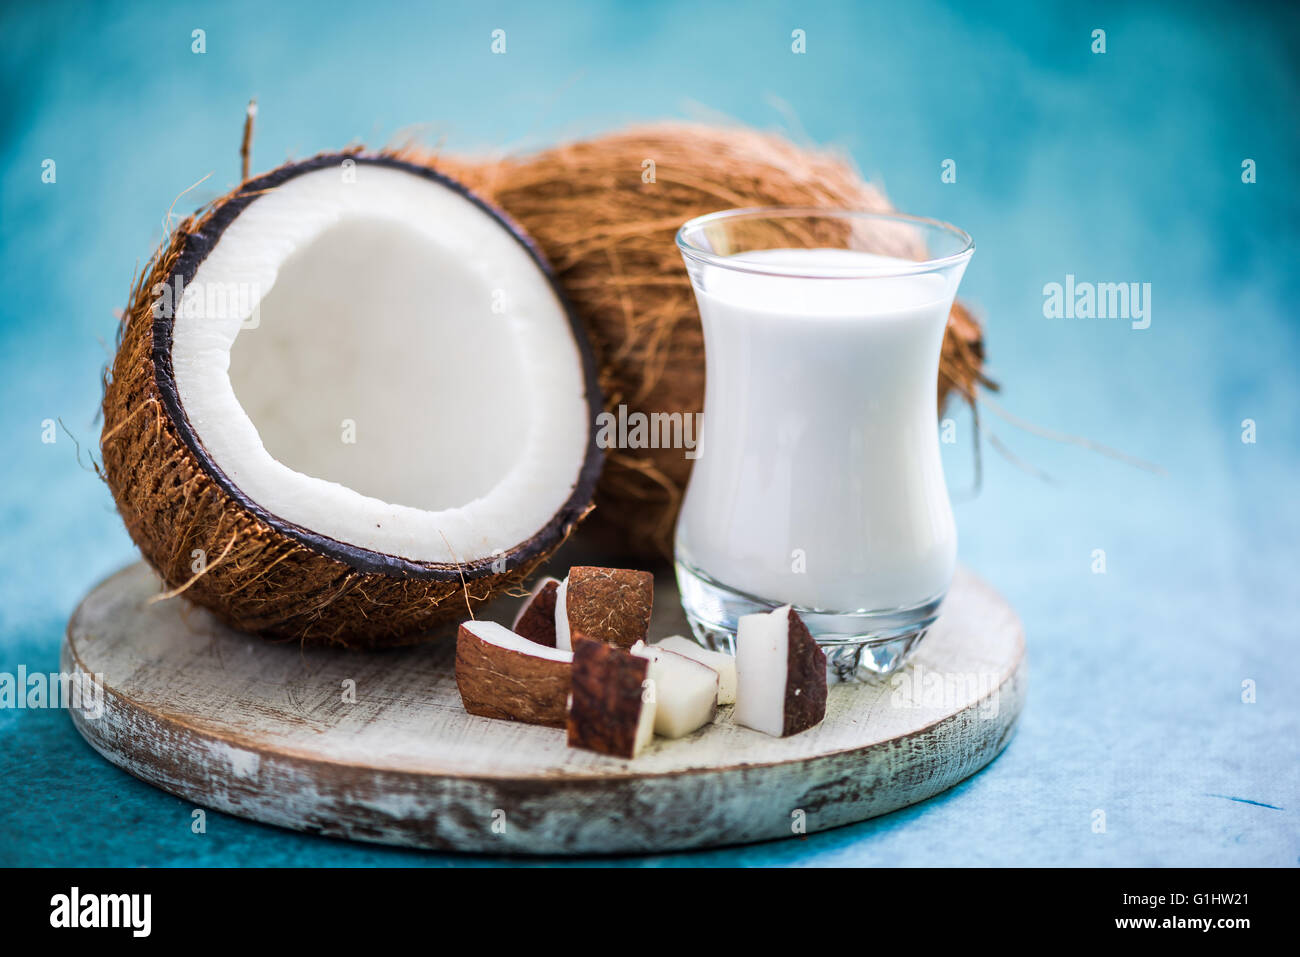 fresh and healthy coconut milk with whole nut and pieces Stock Photo